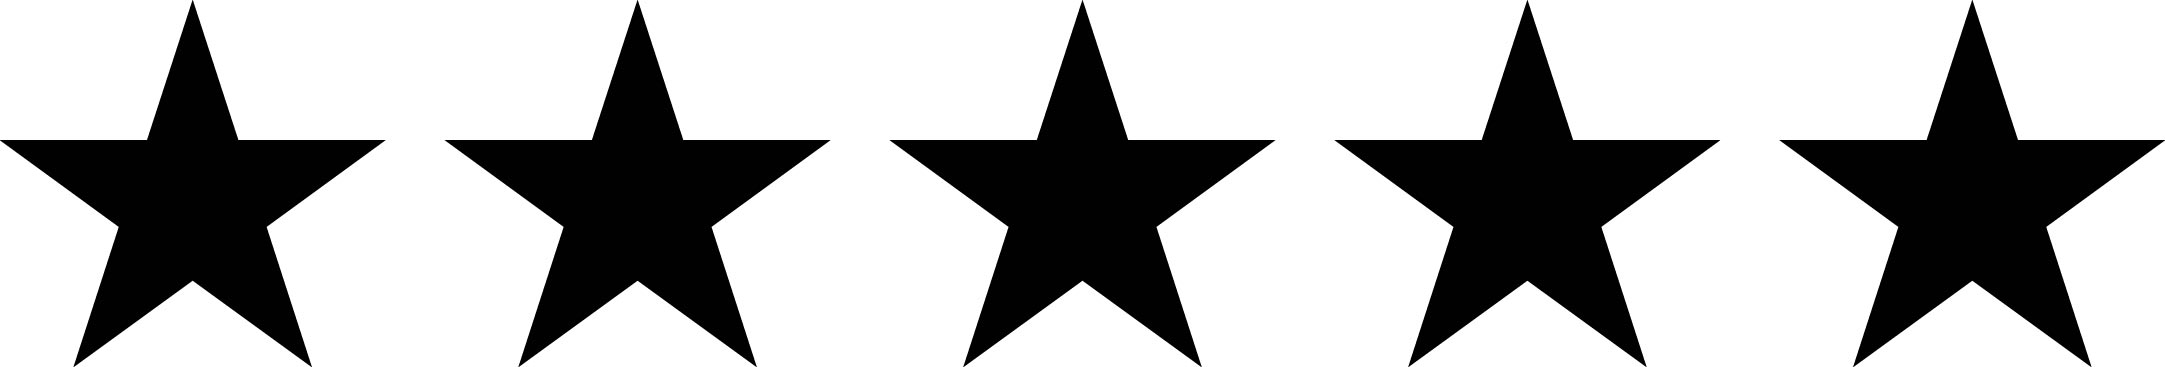 Star rating labels | The List